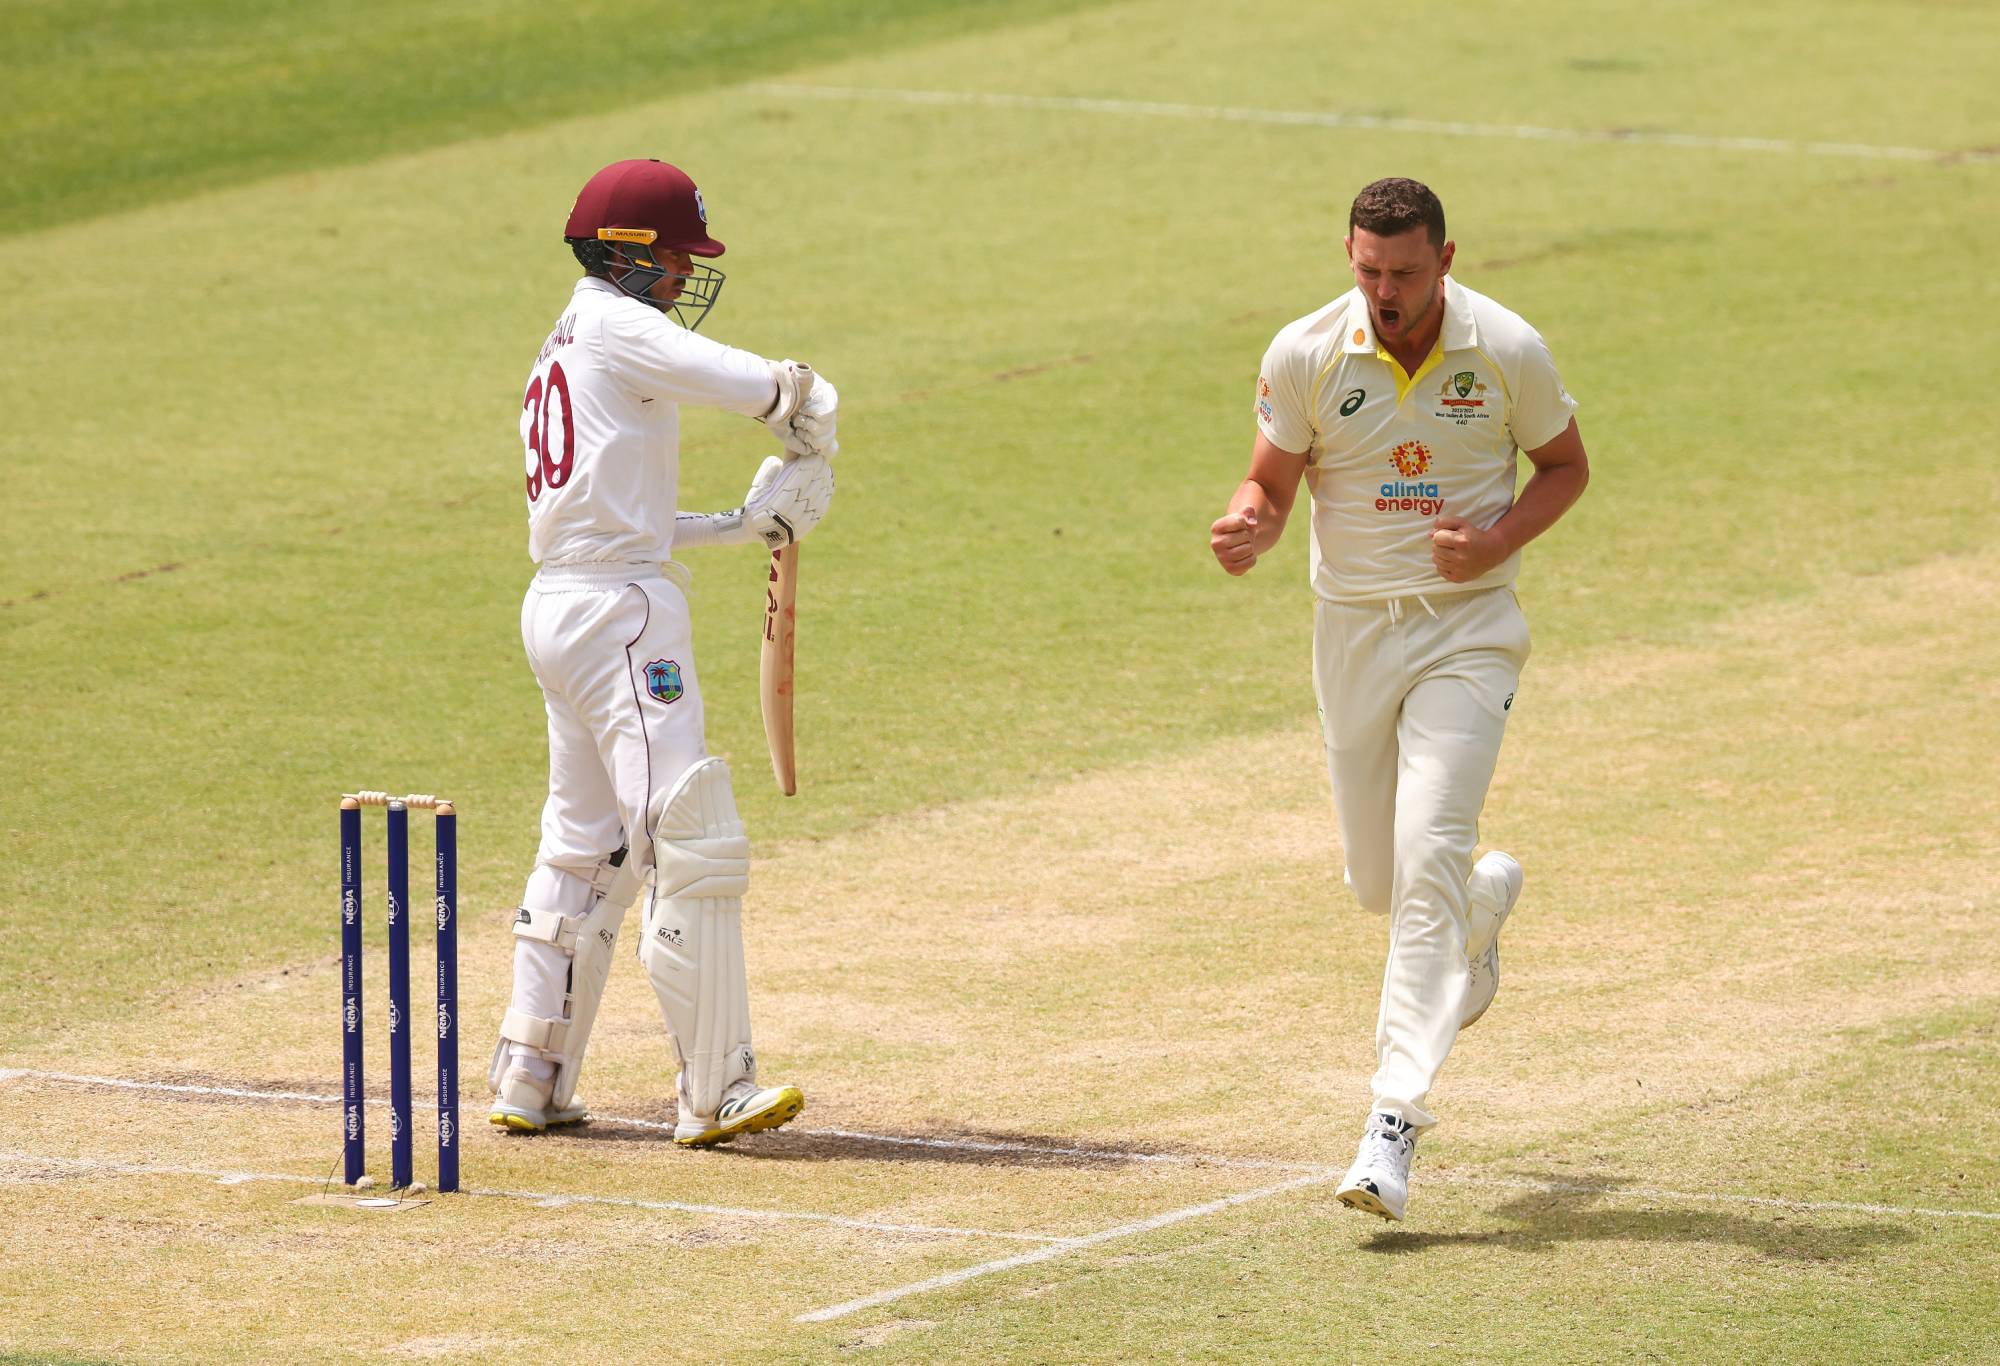 PERTH, AUSTRALIA - DECEMBER 02: Josh Hazlewood of Australia celebrates his wicket during day three of the First Test match between Australia and the West Indies at Optus Stadium on December 02, 2022 in Perth, Australia. (Photo by James Worsfold/Getty Images)